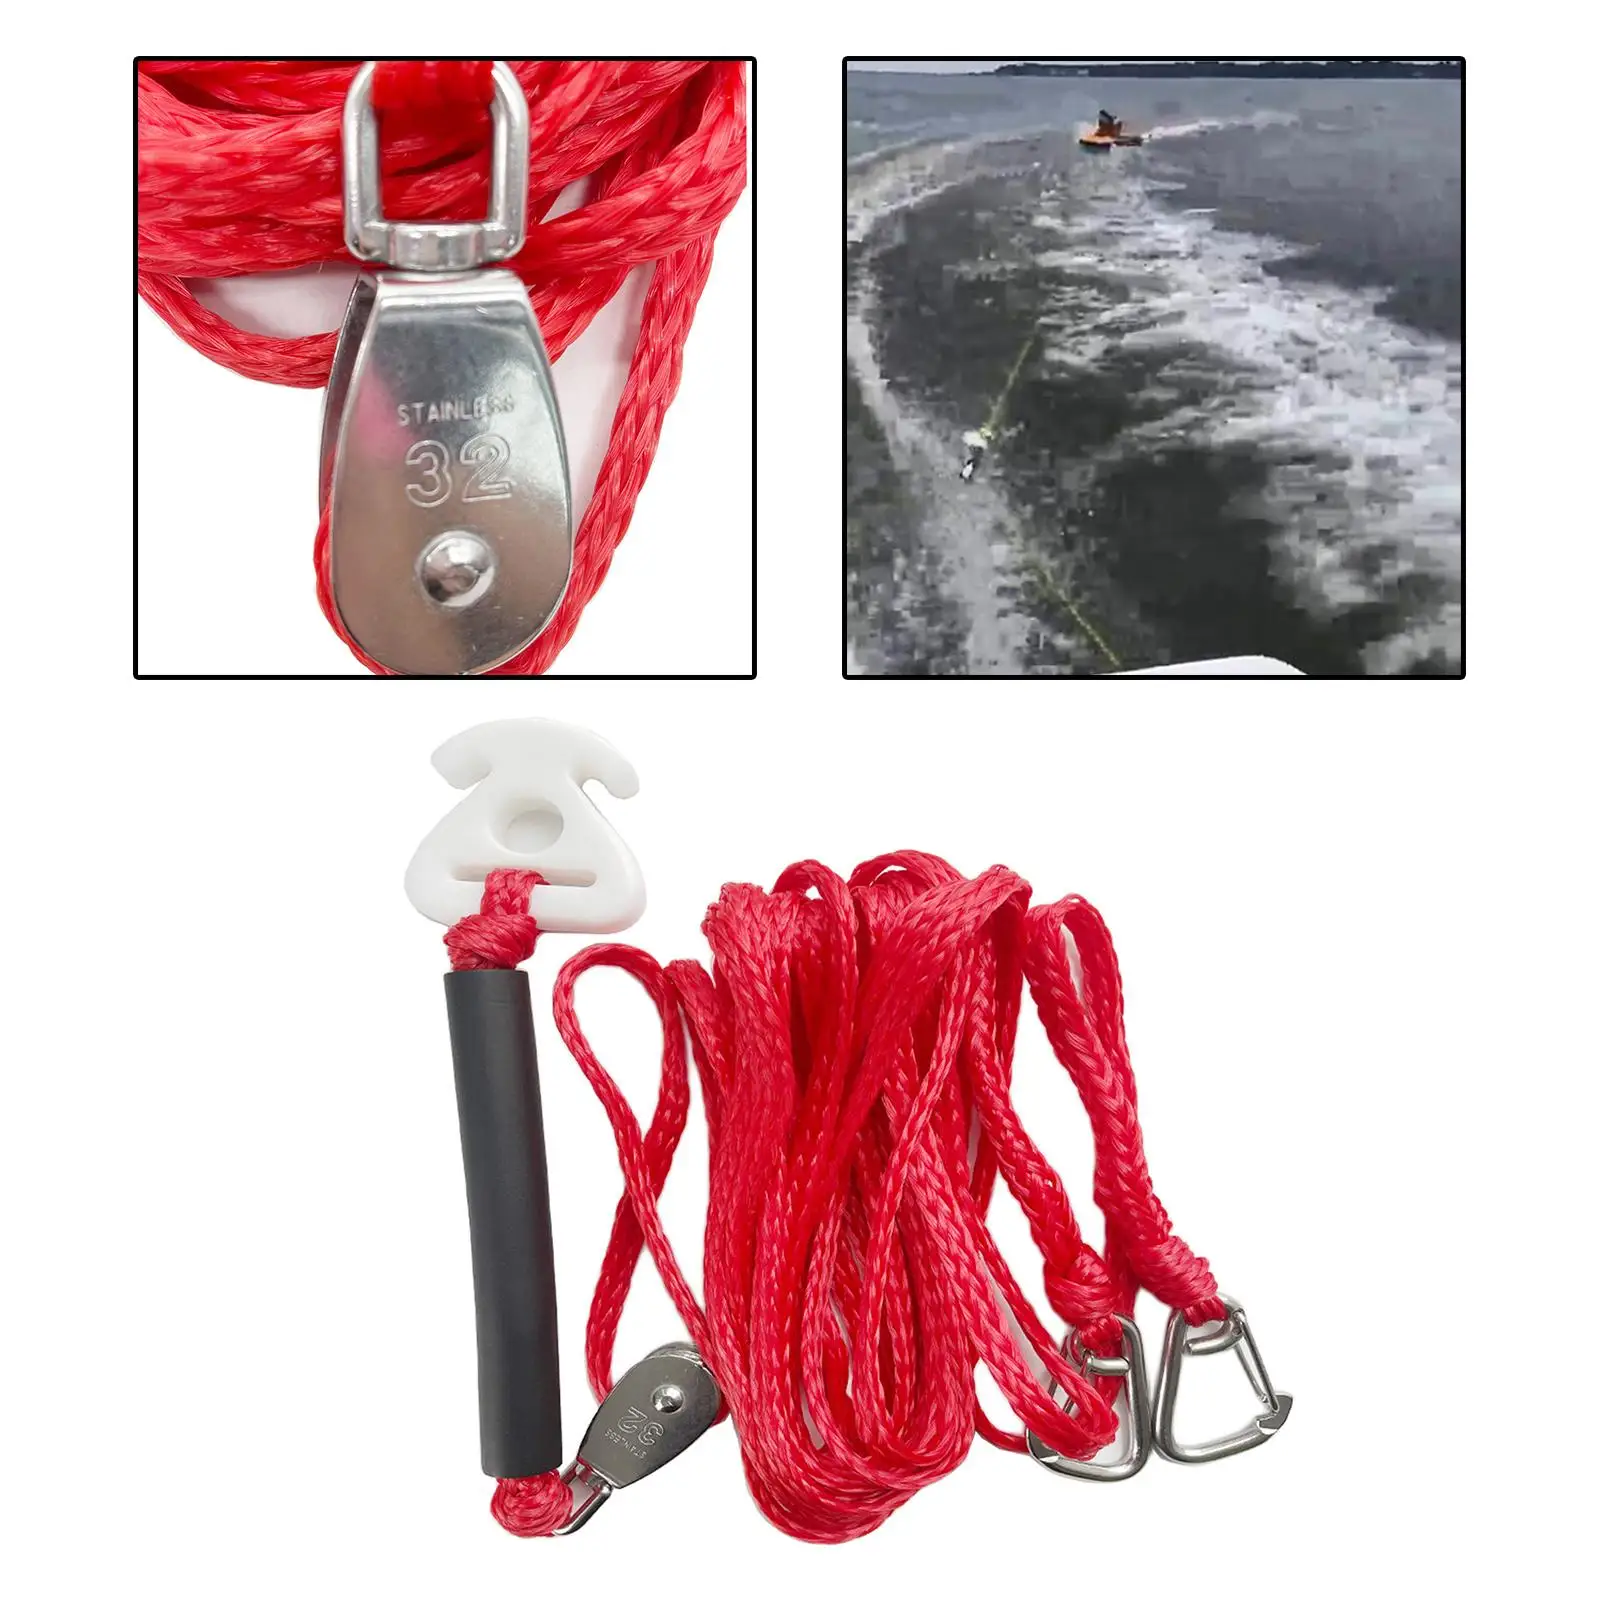 12 Feet Tow Harness Watersports Rope with Hook Quick Connector & Pulley for Boating Water Ski Tubing Wakeboarding Waakeboarding